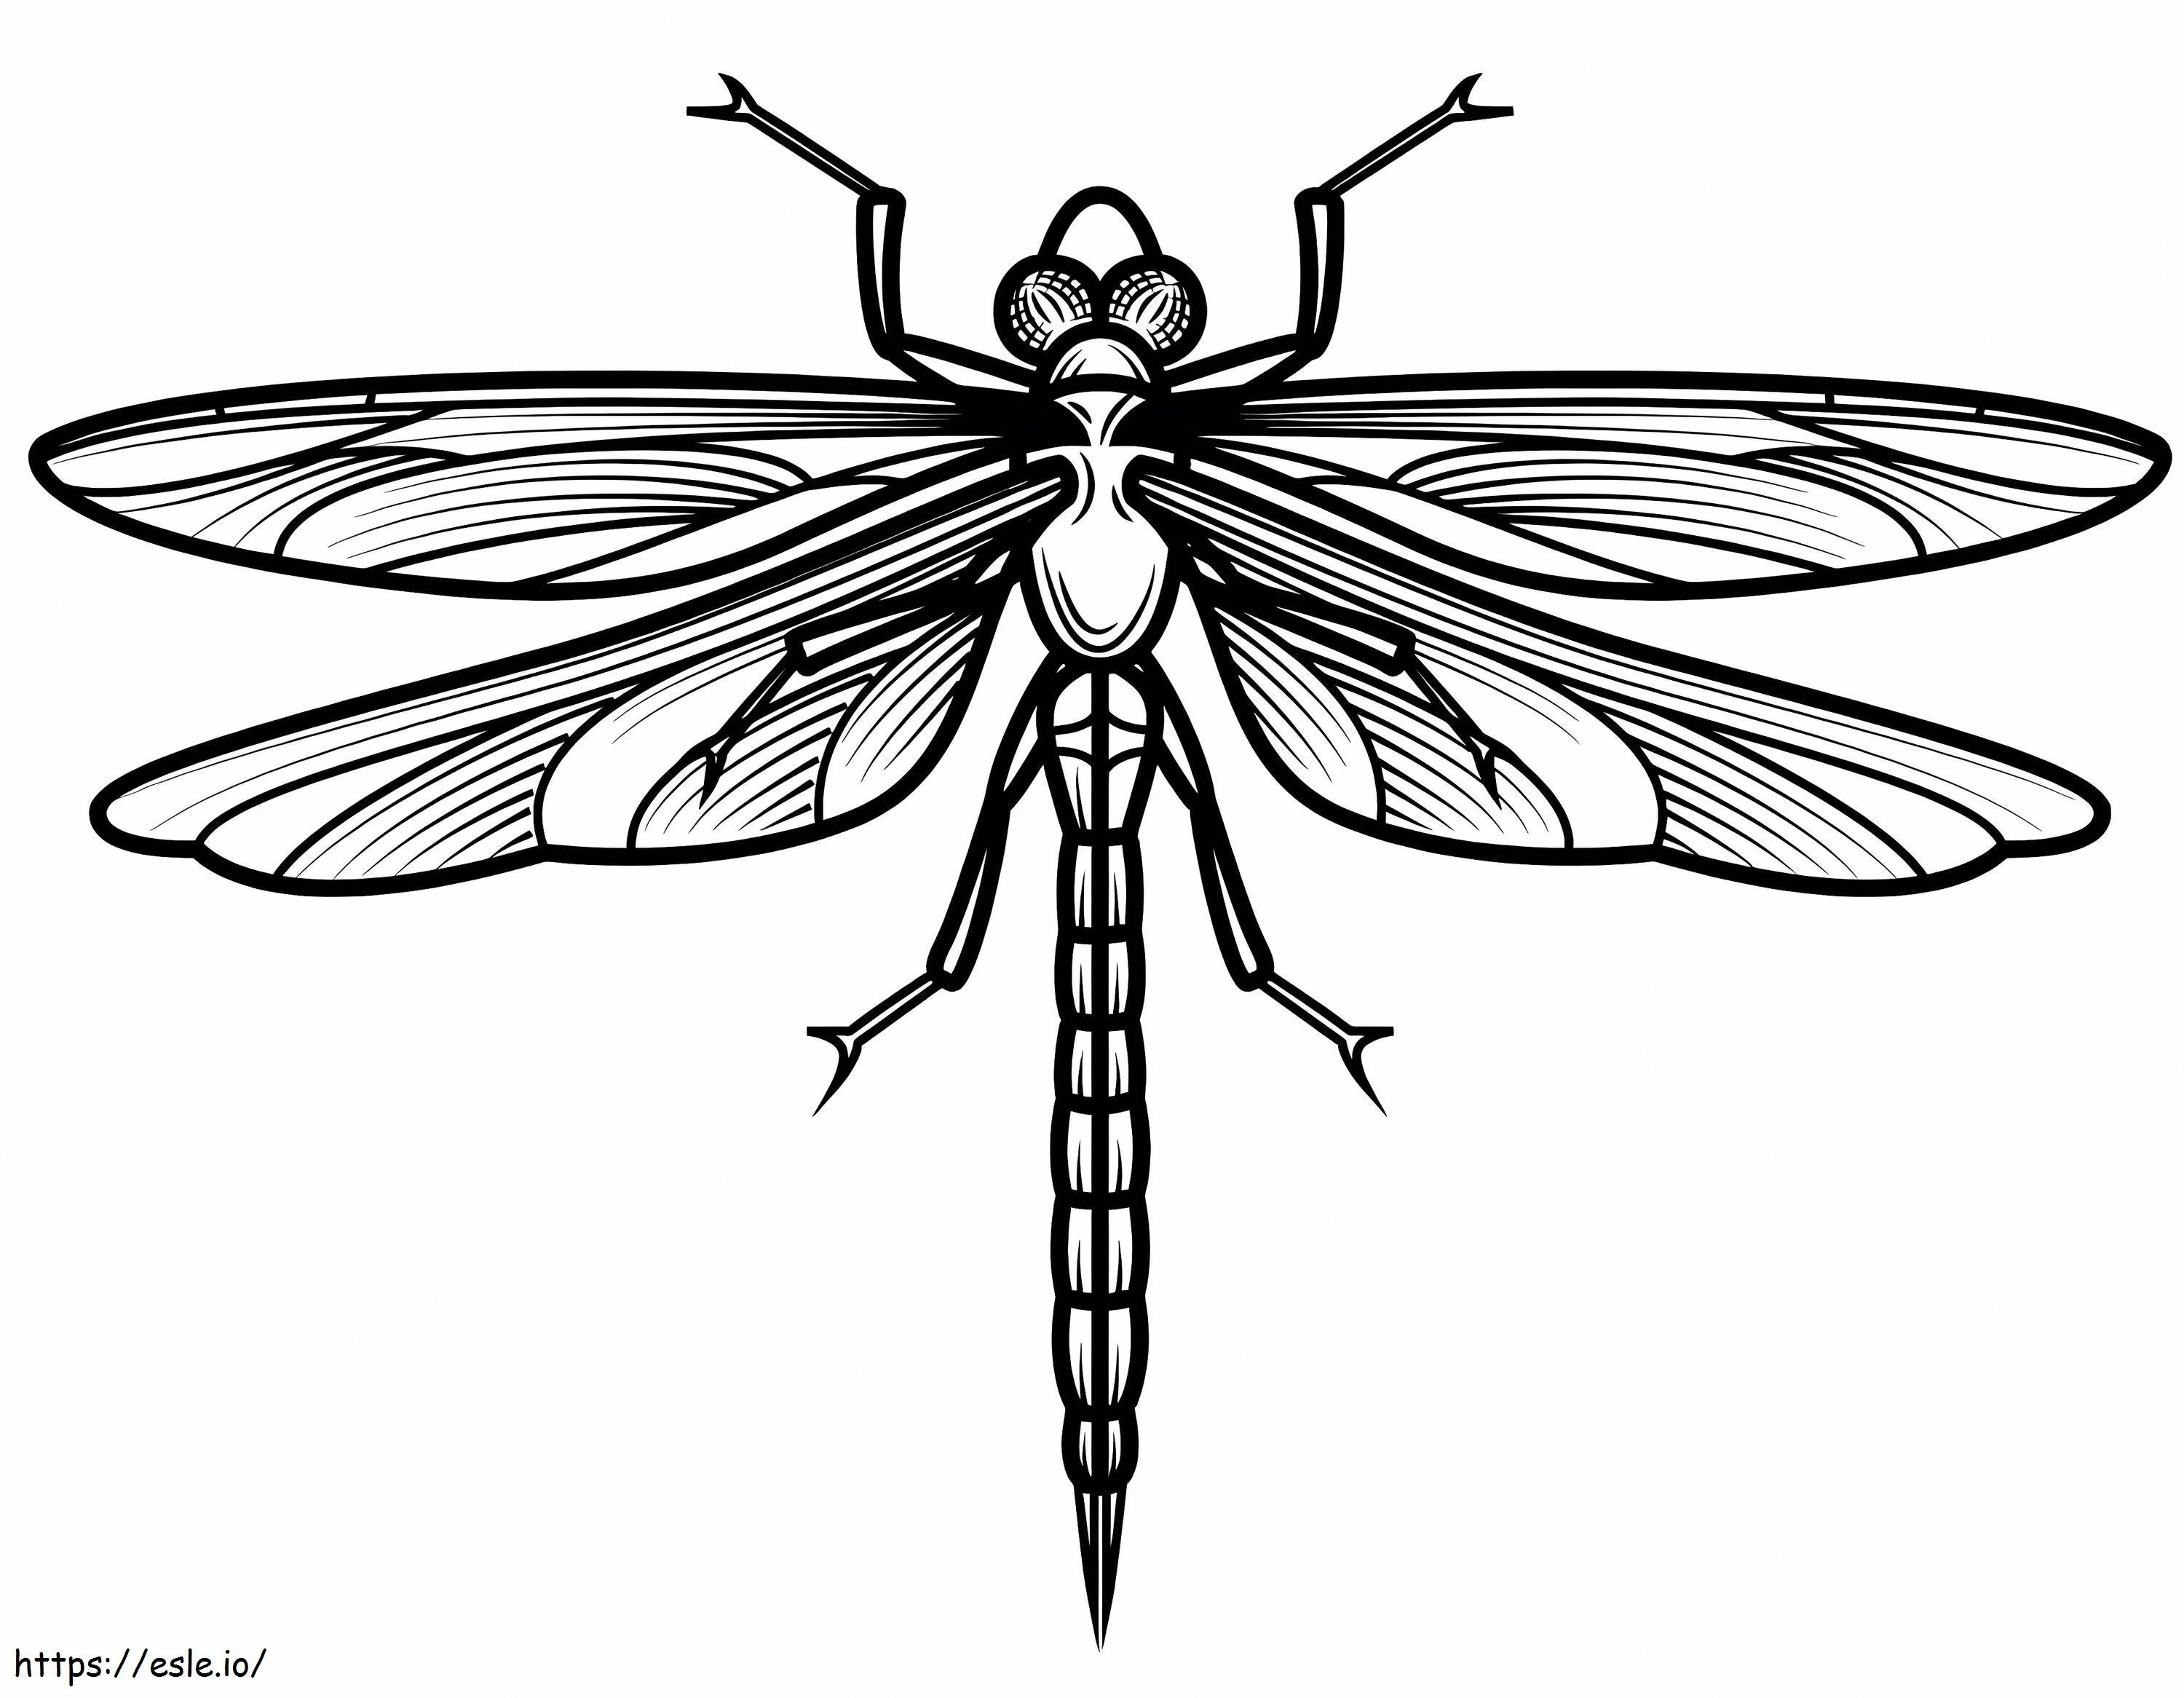 Dragonfly 3 coloring page